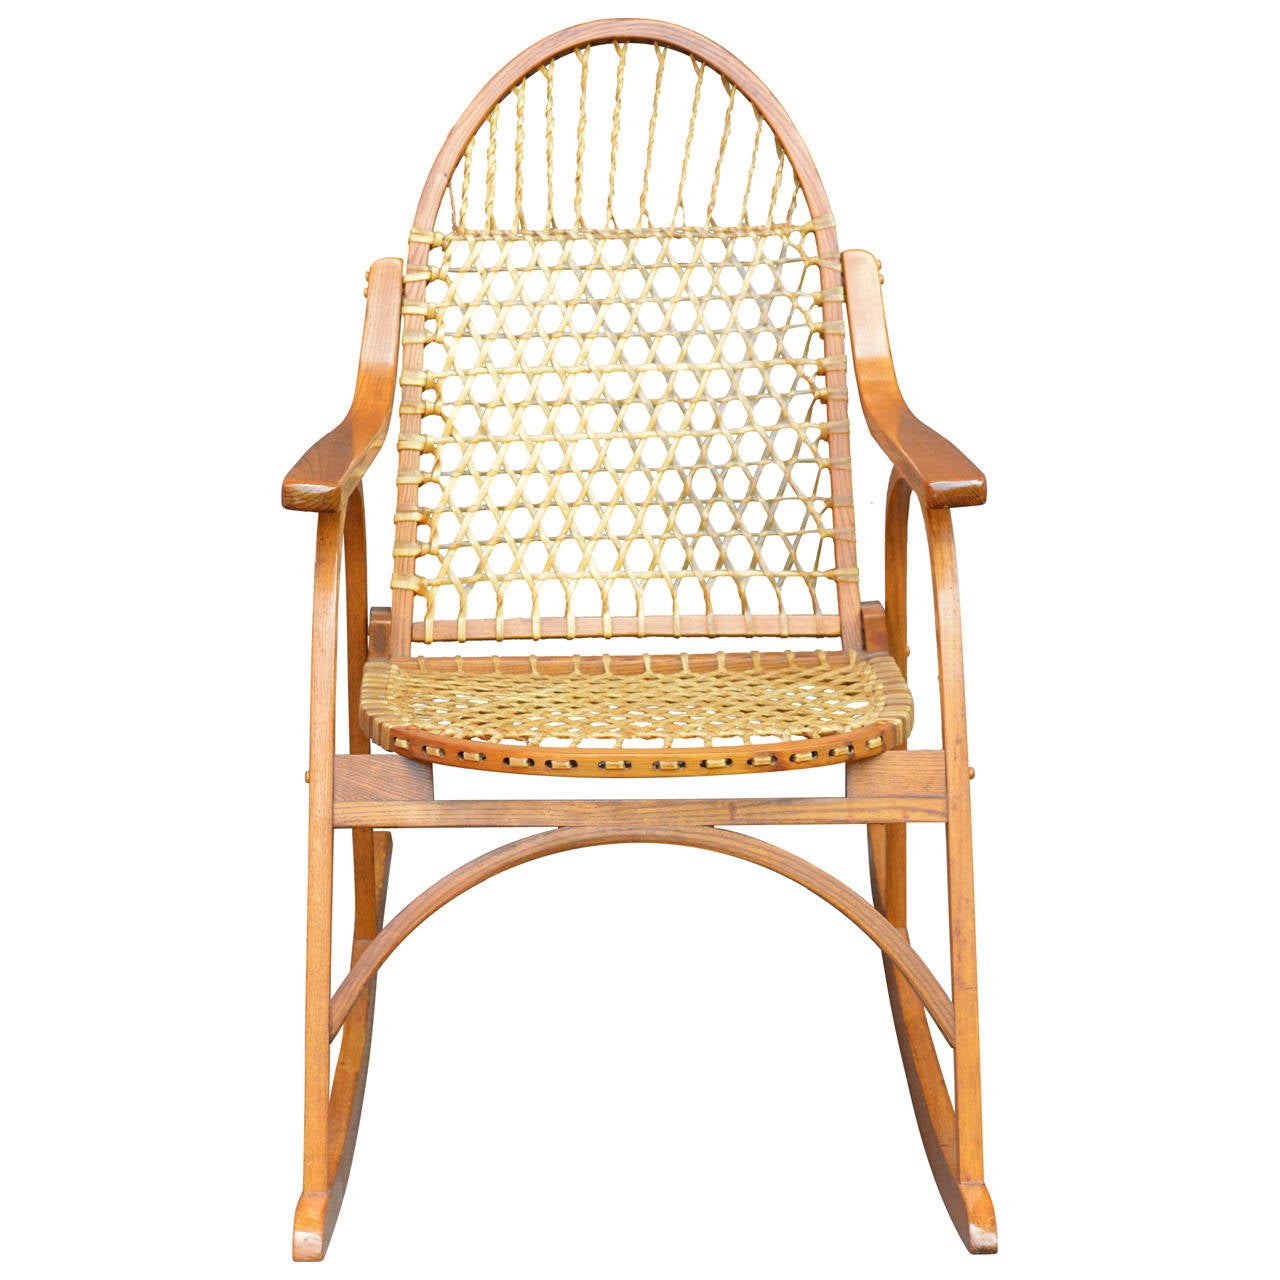 Wood Vermont Tubbs Snowshoe Rocking Chair